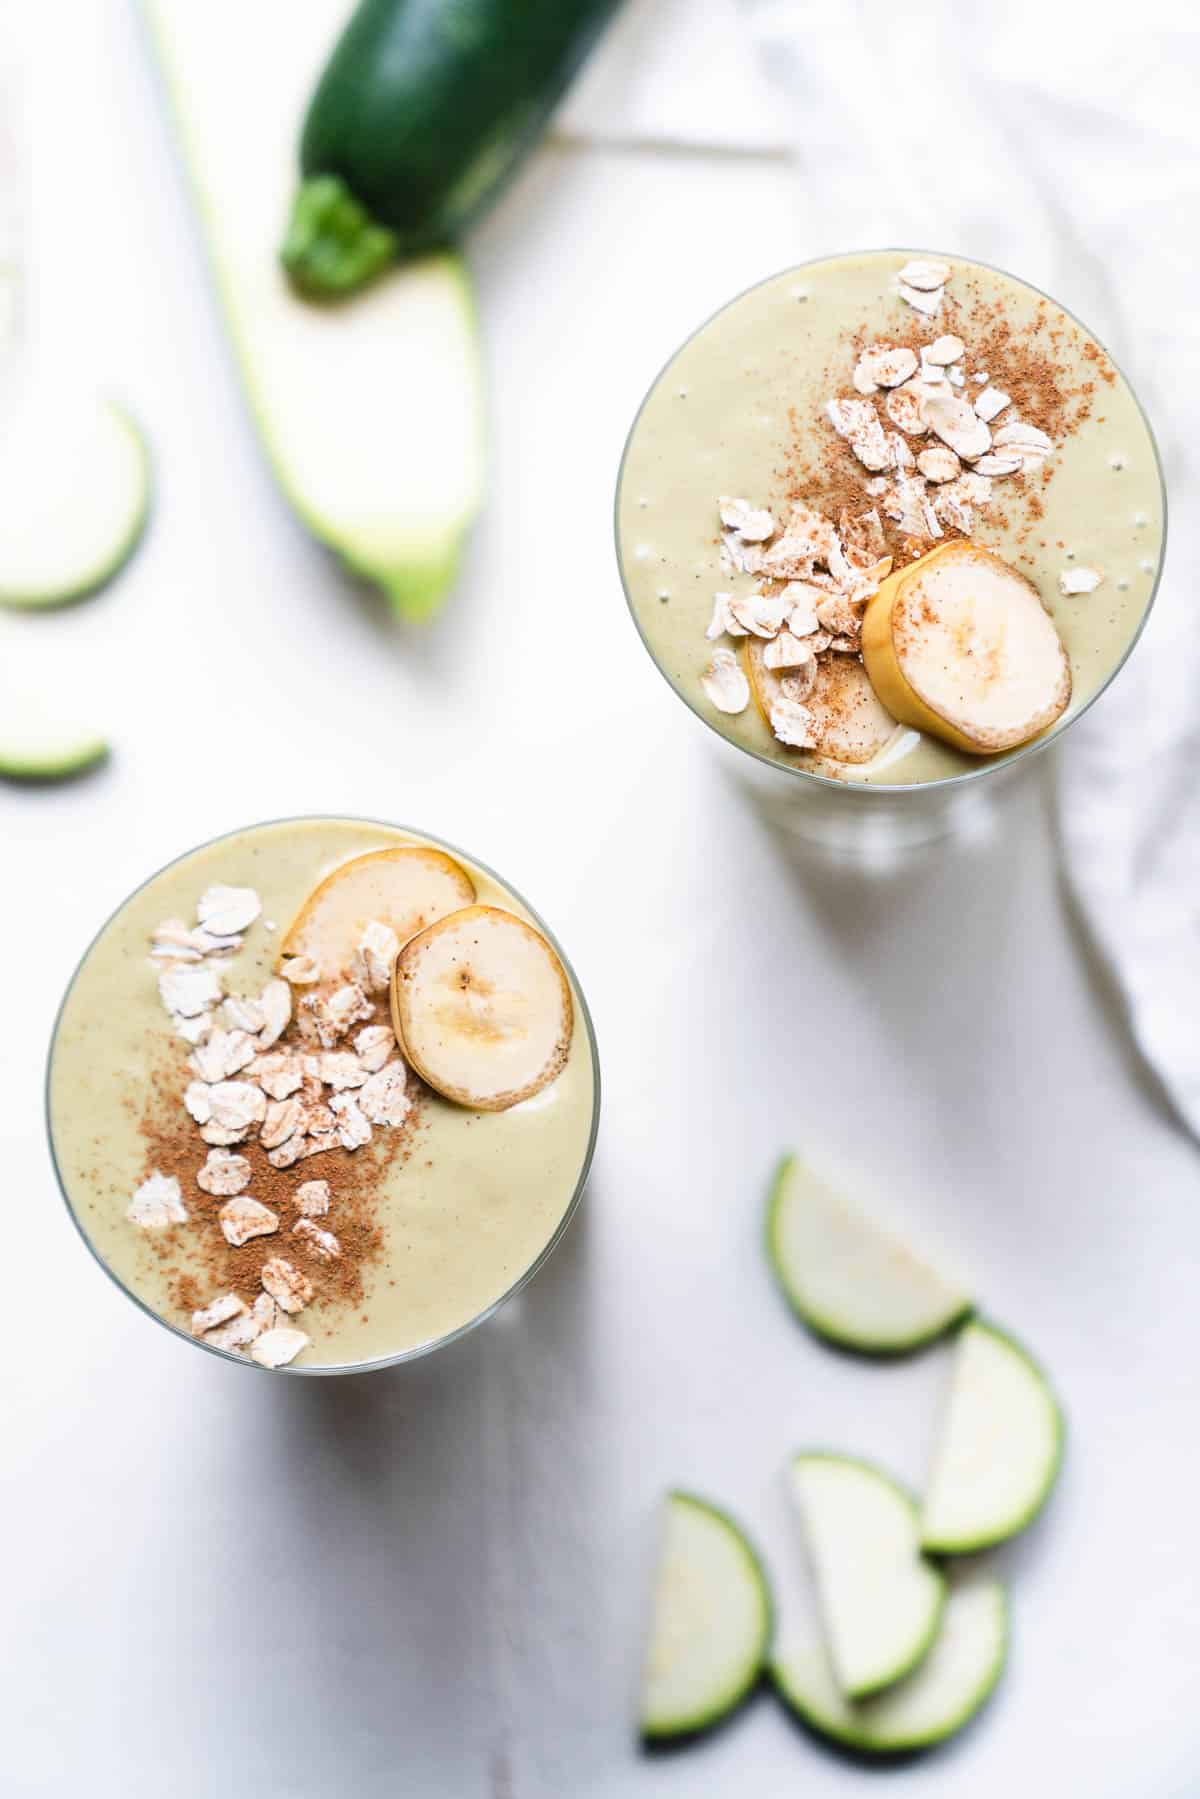 Two zucchini smoothies topped with rolled oats, cinnamon and sliced bananas.